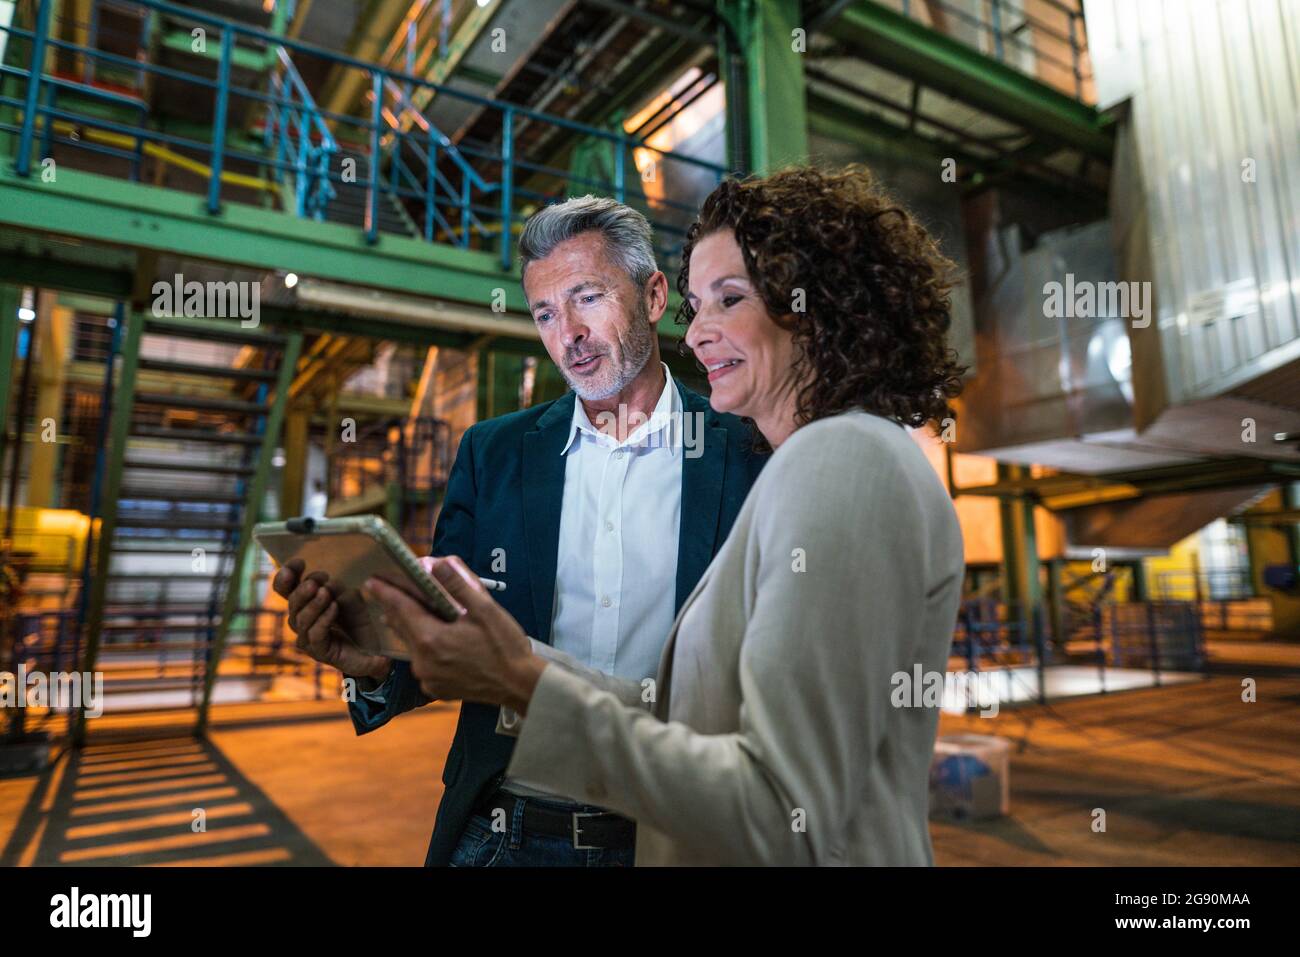 Professional team using digital tablet while standing in industry Stock Photo